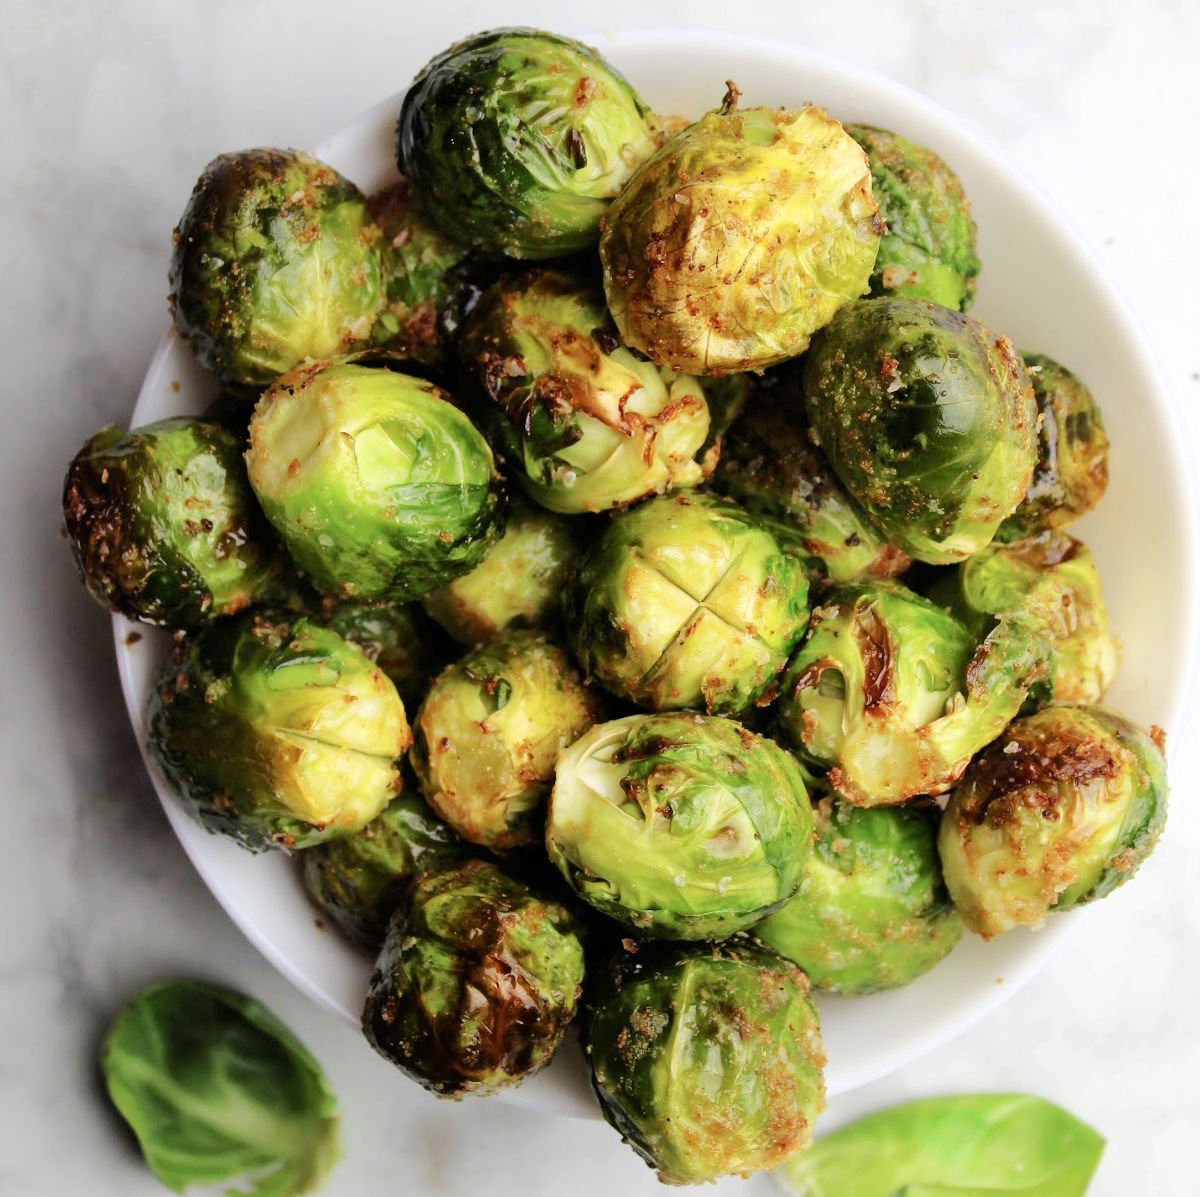 Brussels Sprouts in a white bowl. Skin is crispy with seasoning visible.